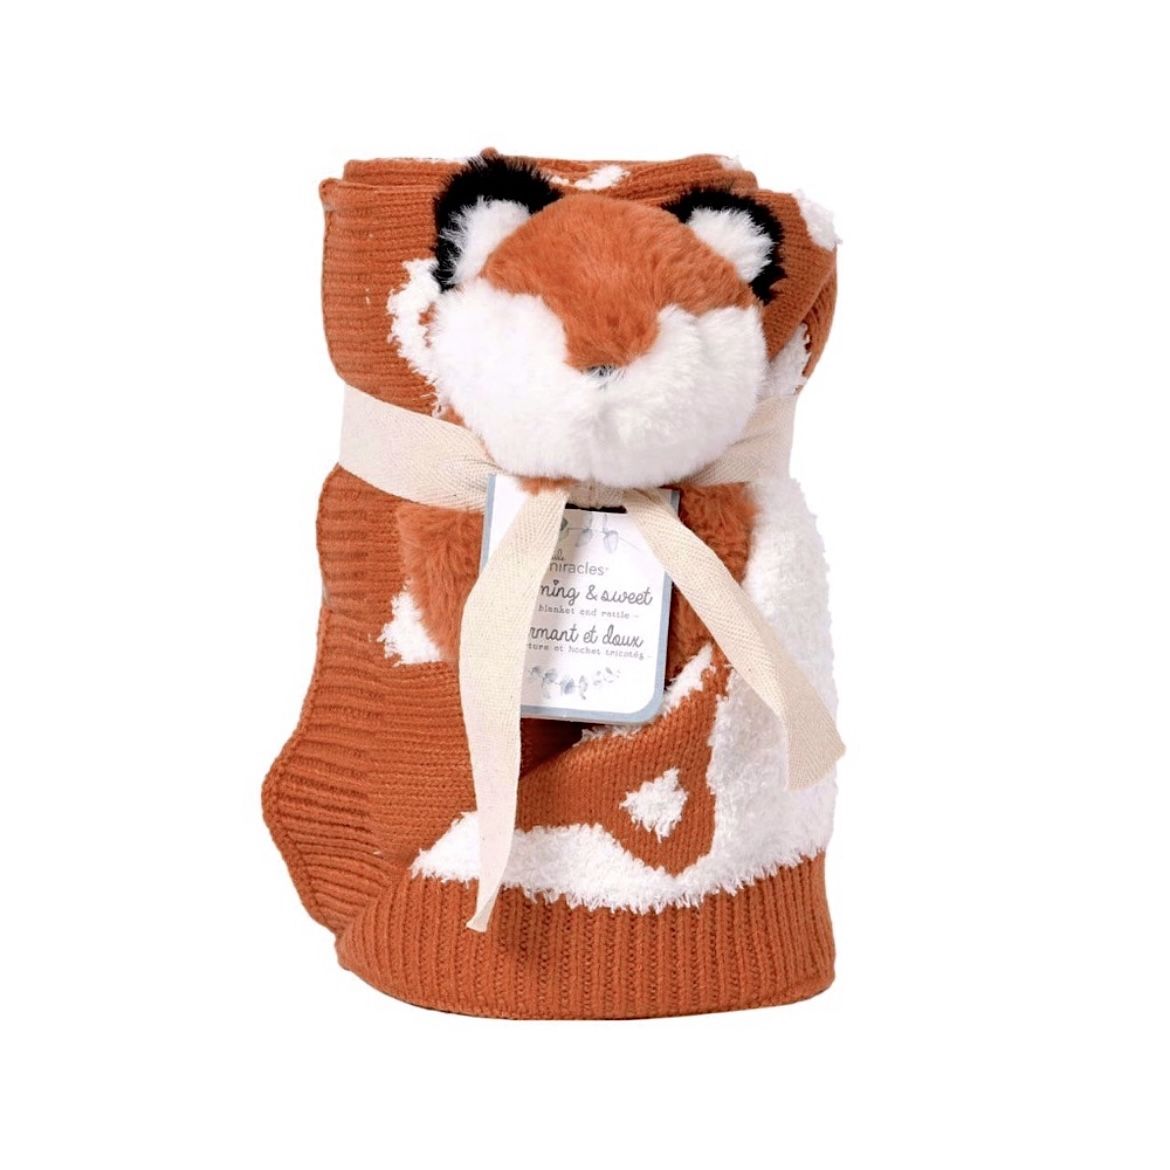 Little Miracles - Knit Blanket and Rattle Set (Fox)